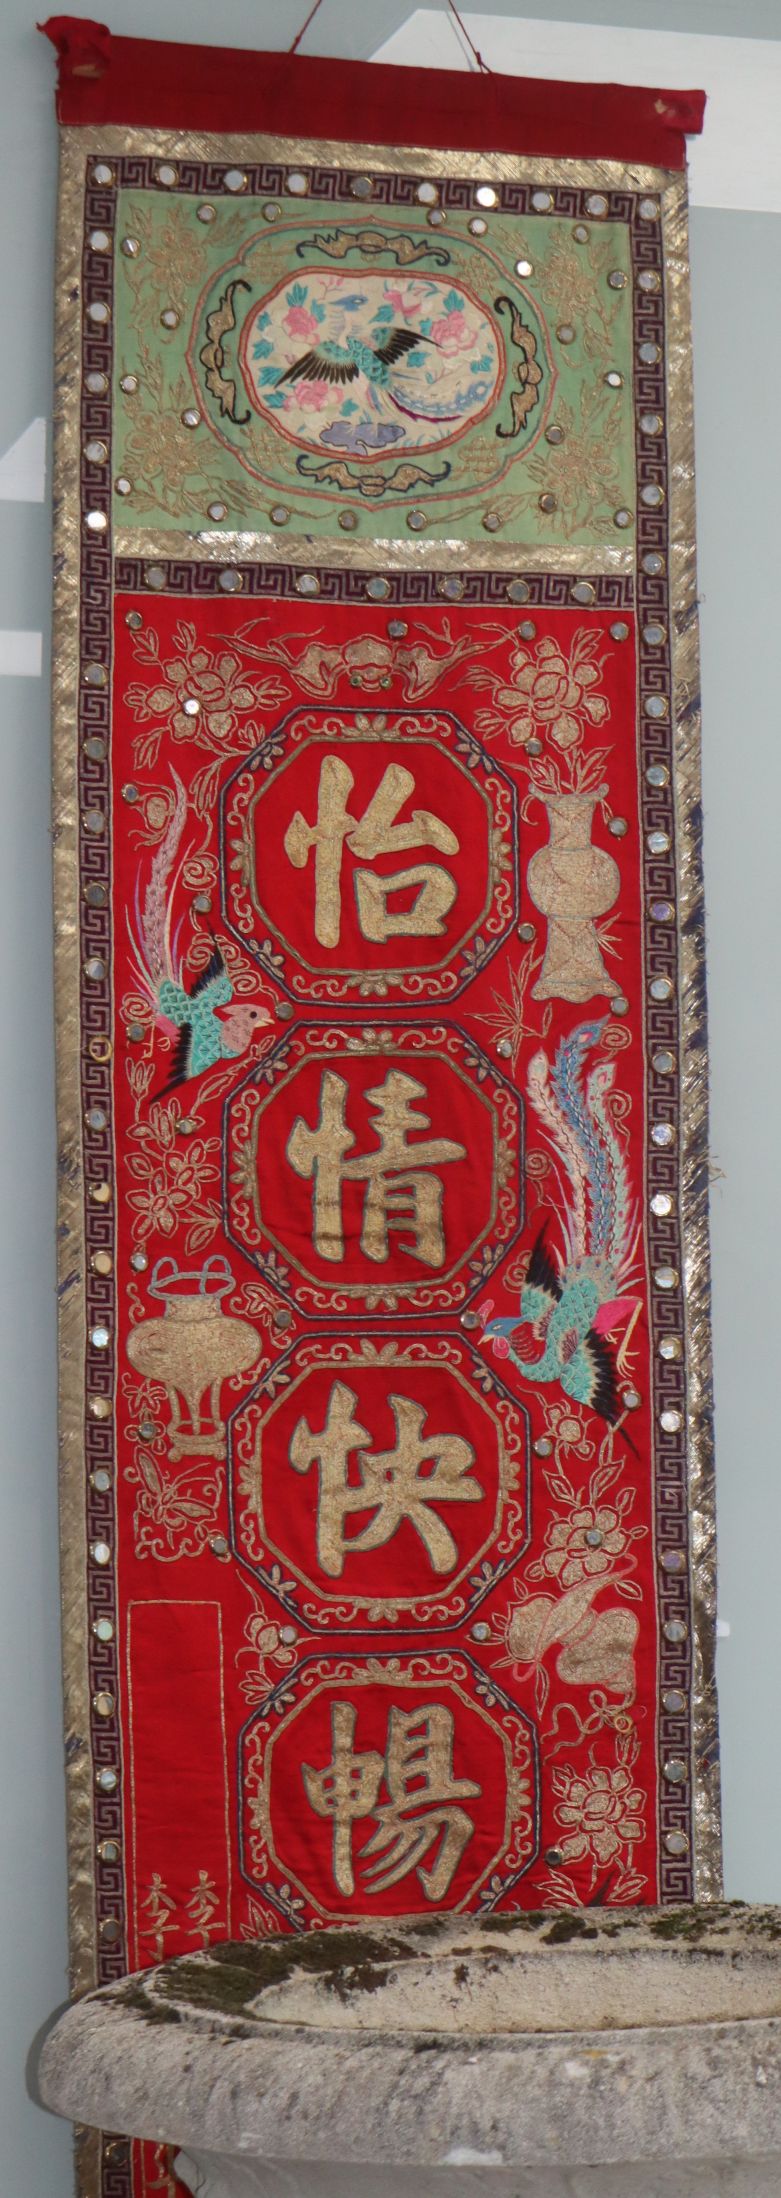 A 20th century Chinese embroidered hanging